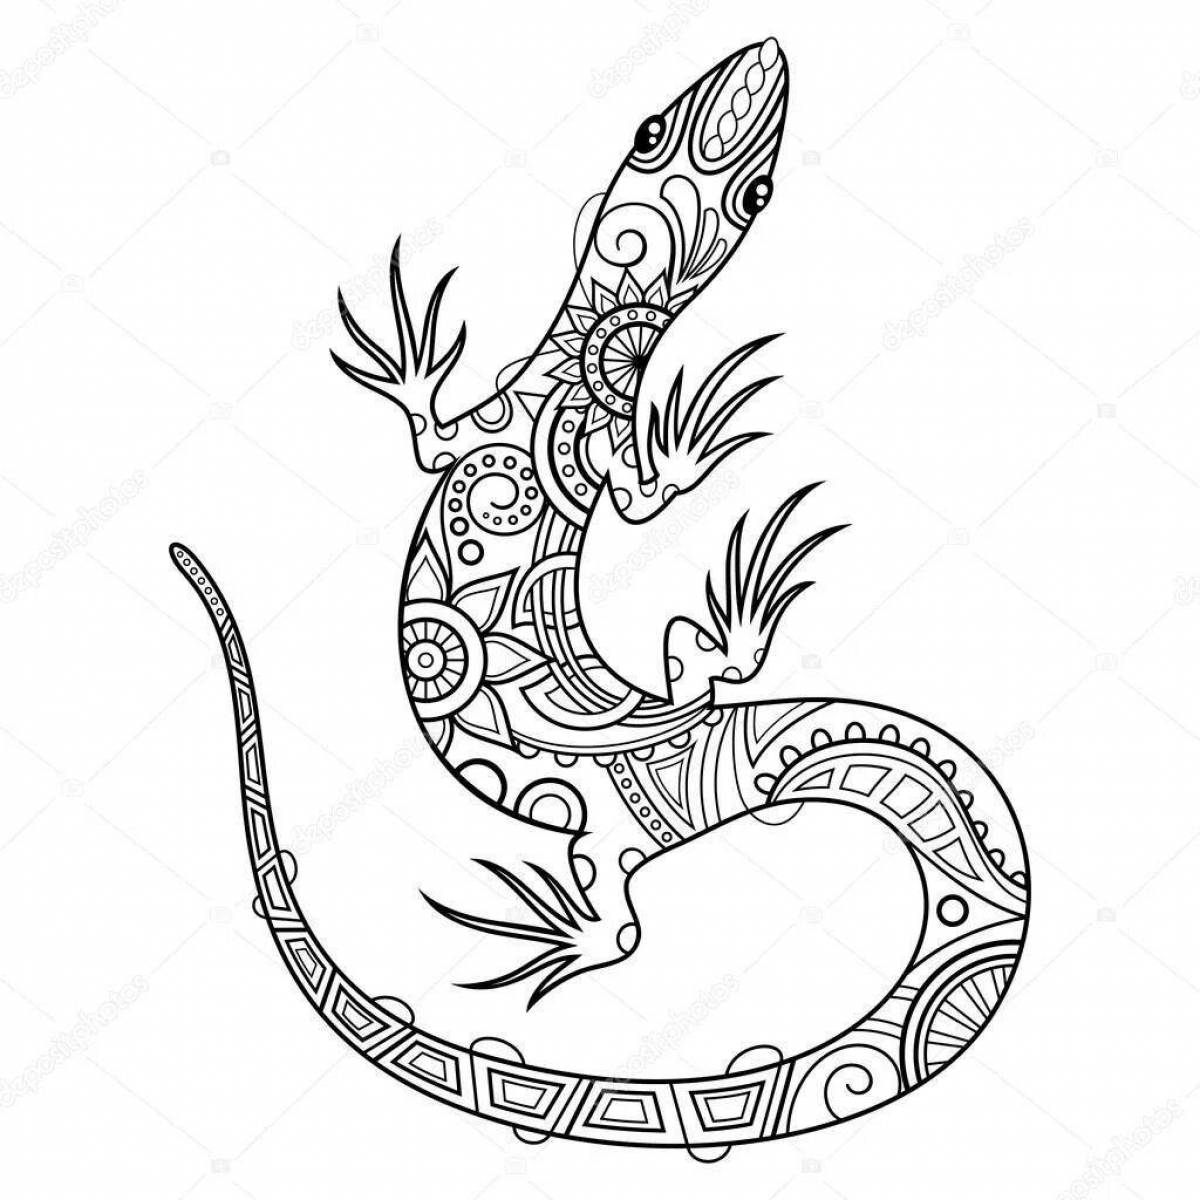 Exalted coloring page copper mountain lizard